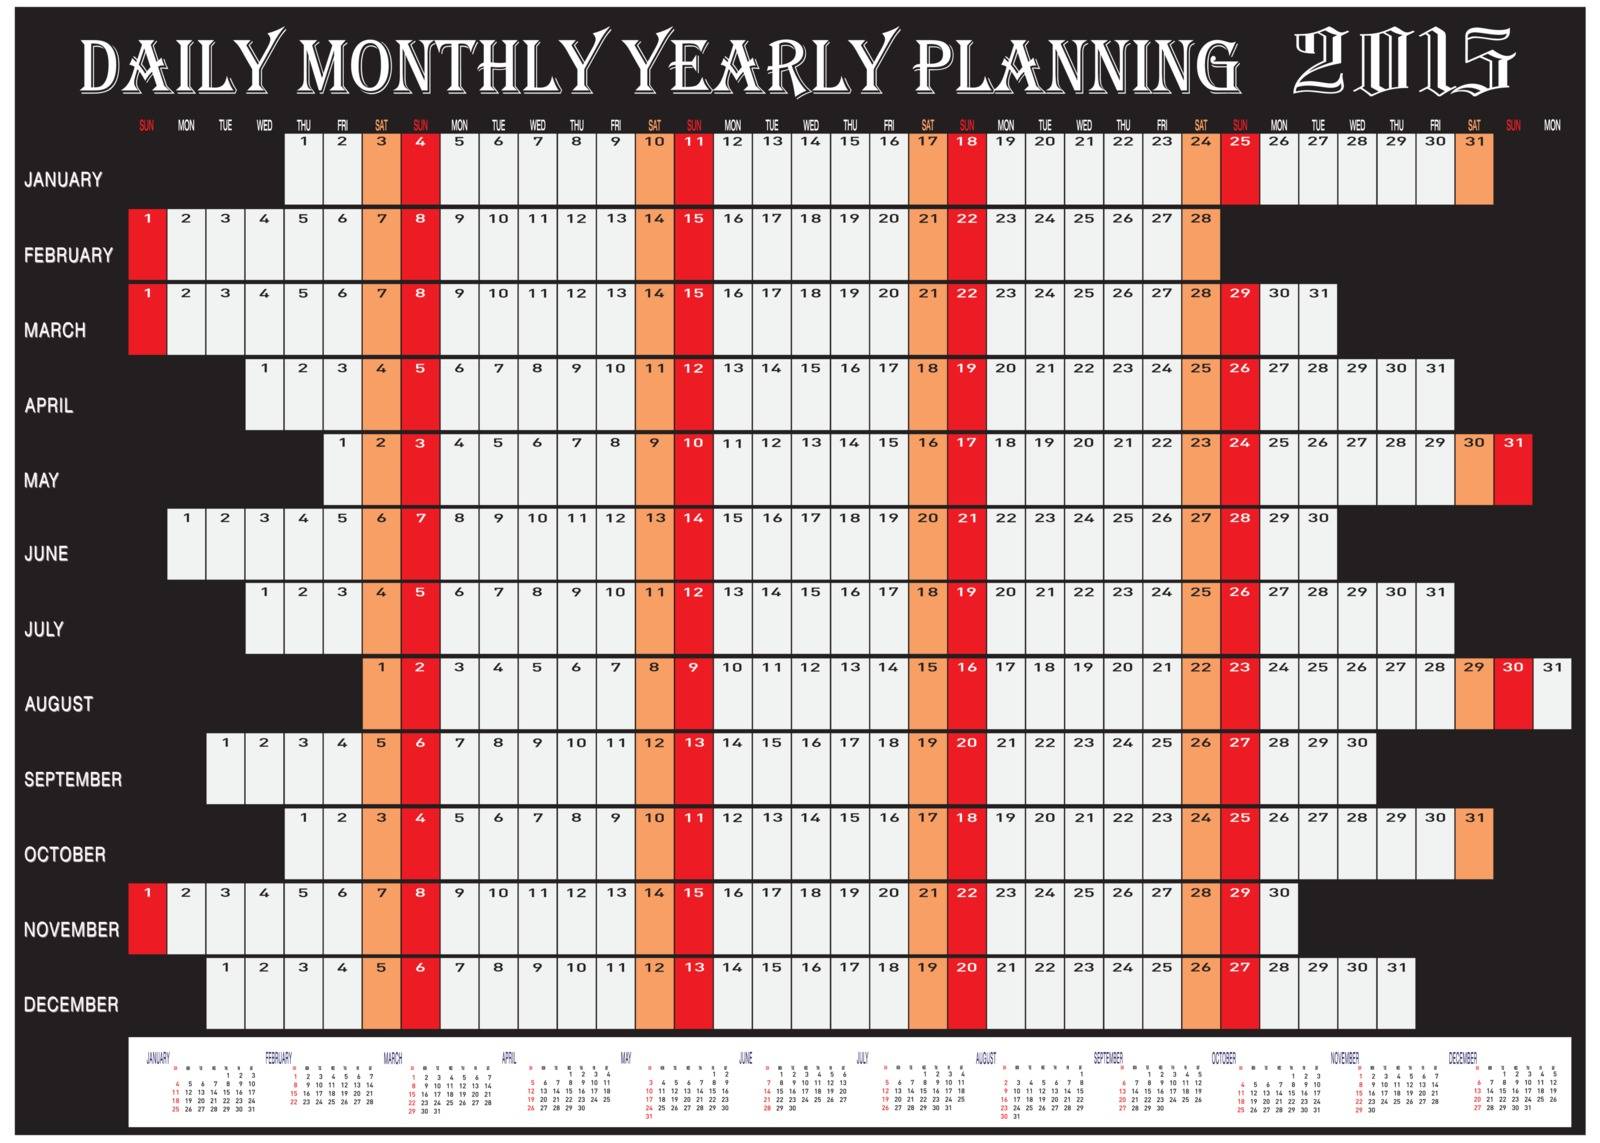 Vector of Planning Chart of Daily Monthly Yearly 2015.